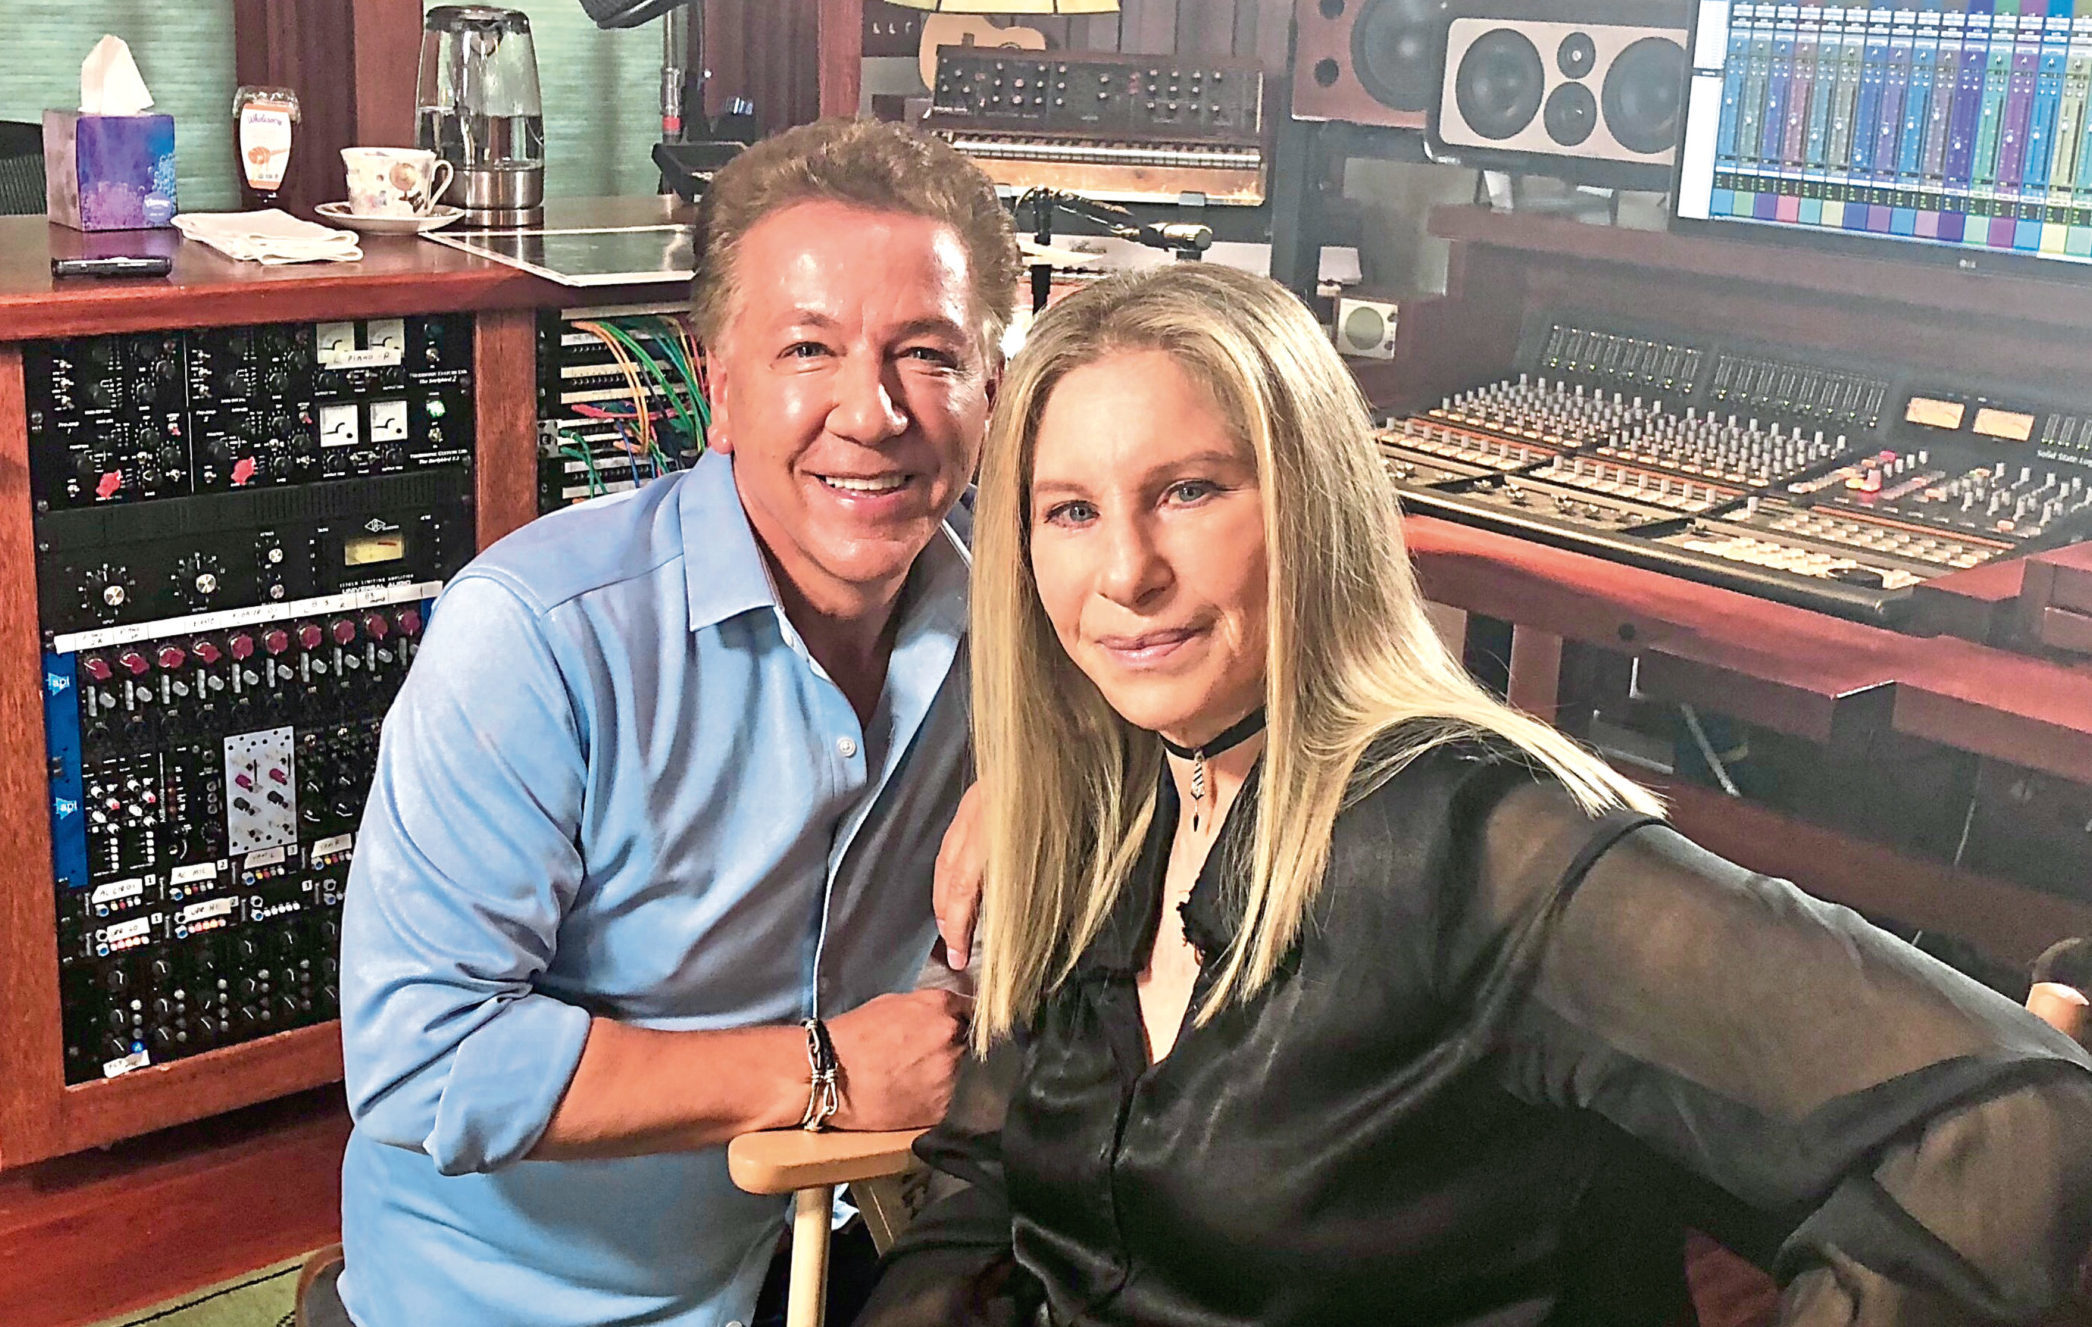 Barbra Streisand, pictured with Ross in LA.